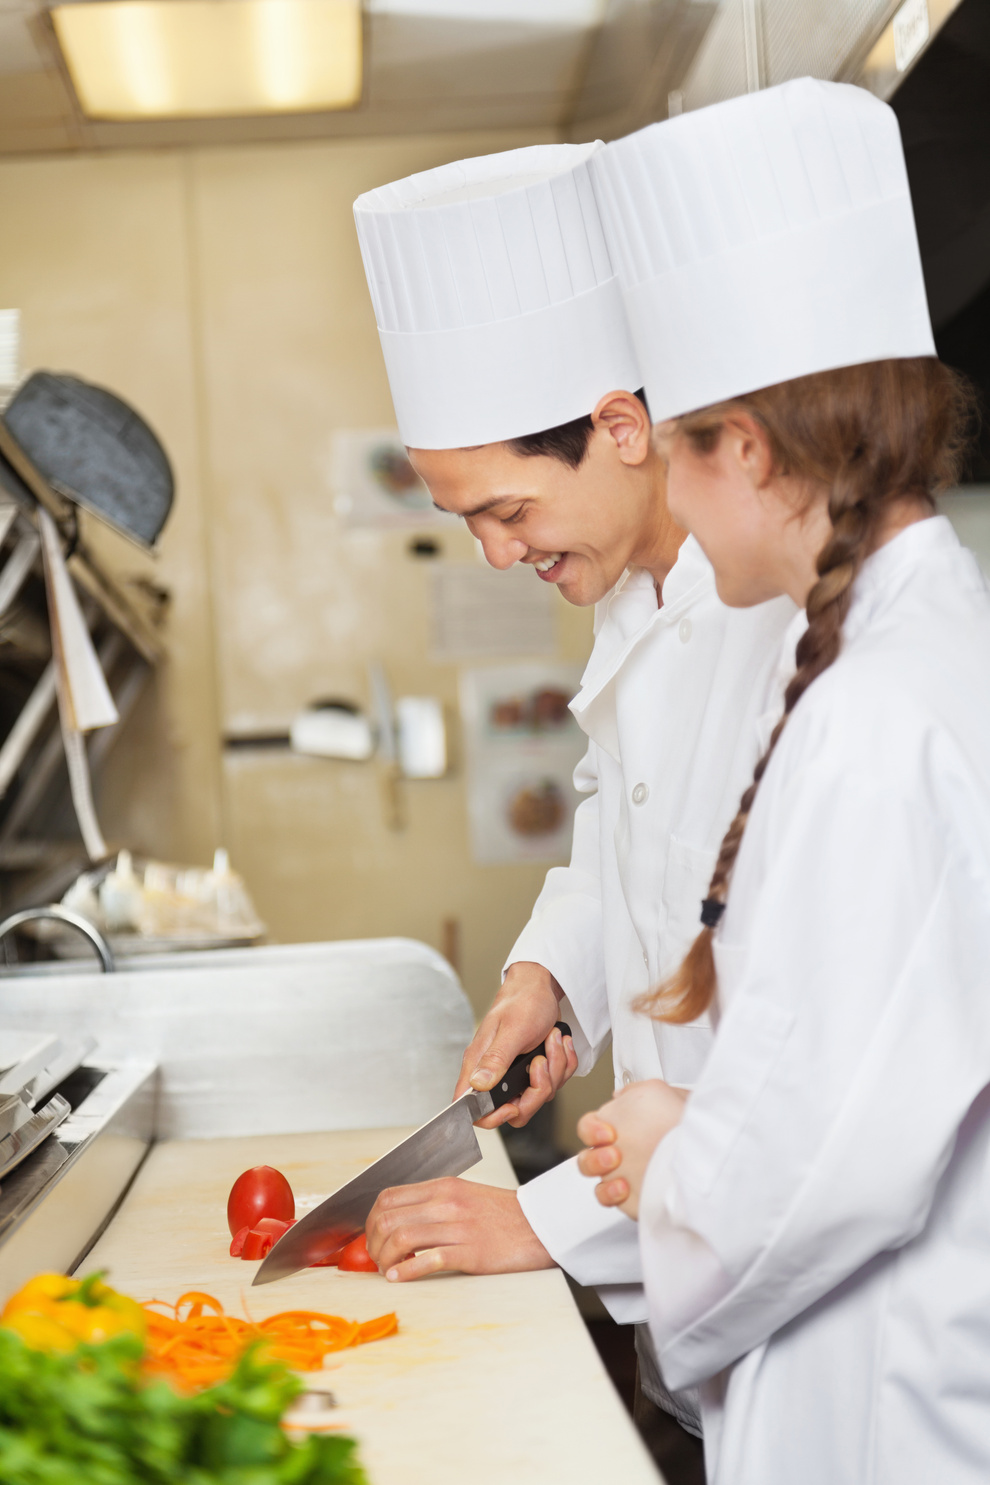 Chef training/teaching assistant to prepare food in commercial restaurant kitchen